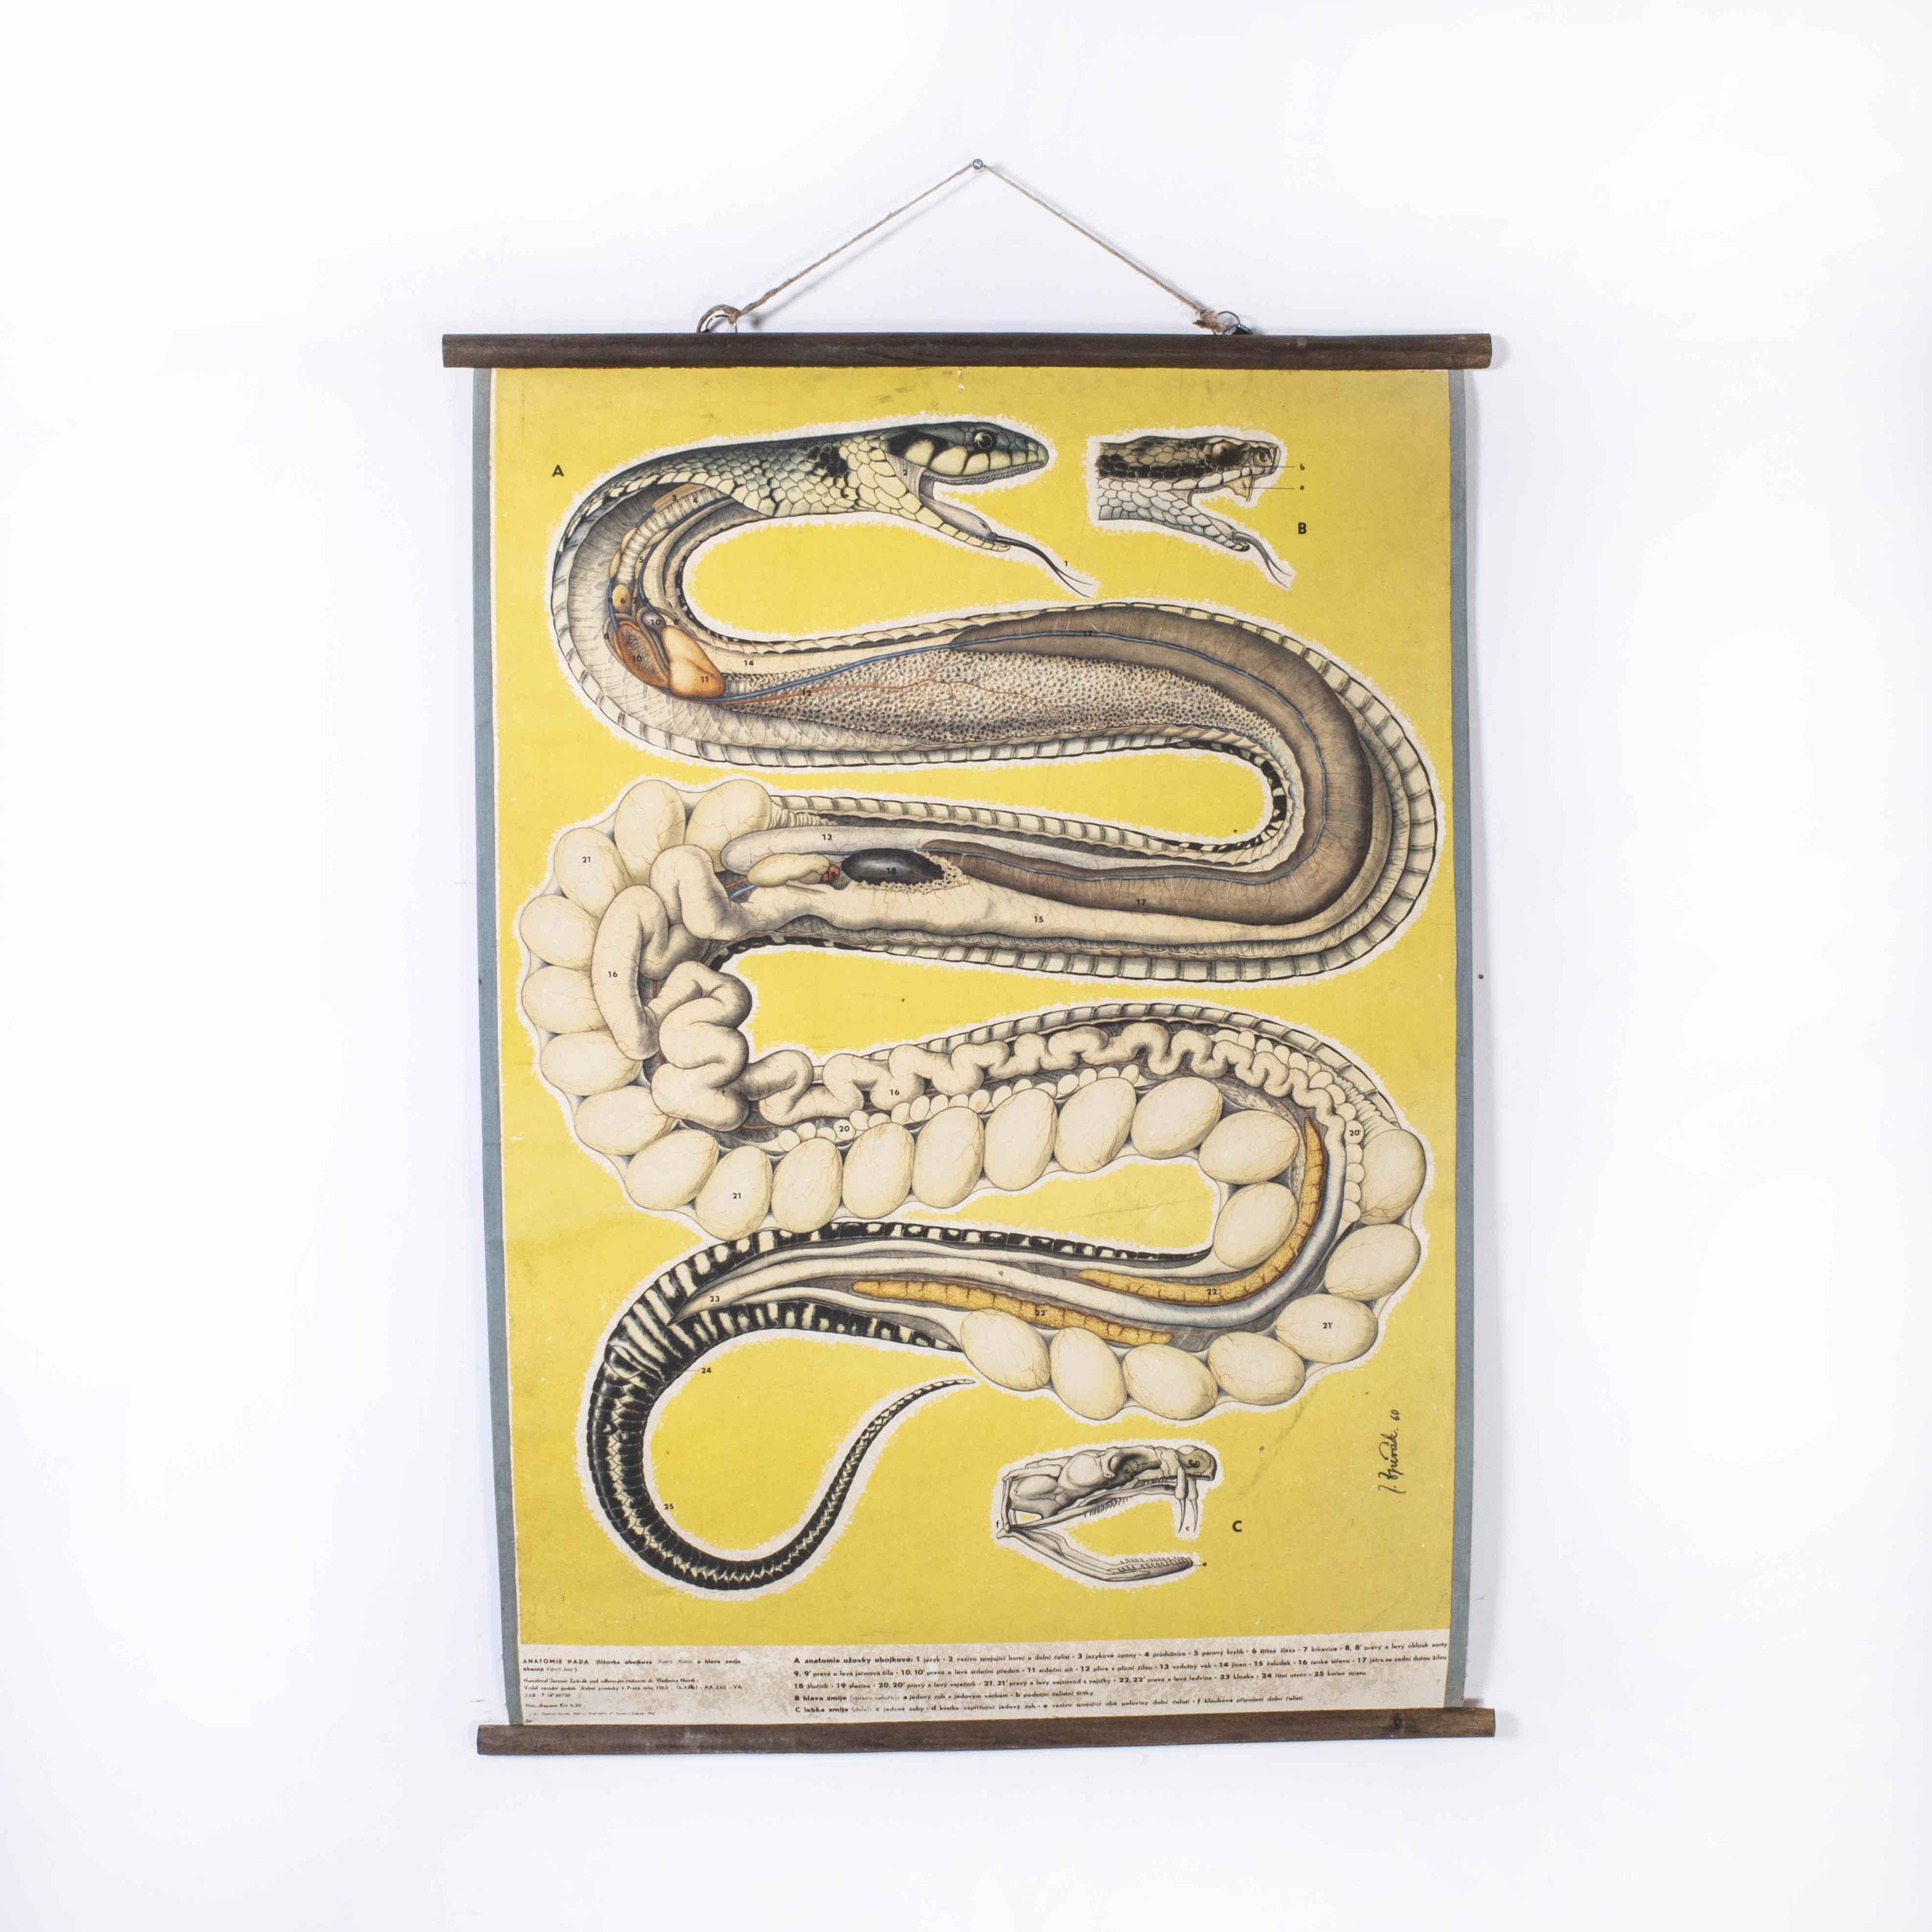 1960’s Snake Educational Poster
1960’s Snake Educational Poster. 20th century Czechoslovakian educational chart. A rare and vintage wall chart from the Czech Republic illustrating the anatomy of a snake. This rigid card backed poster is fixed on